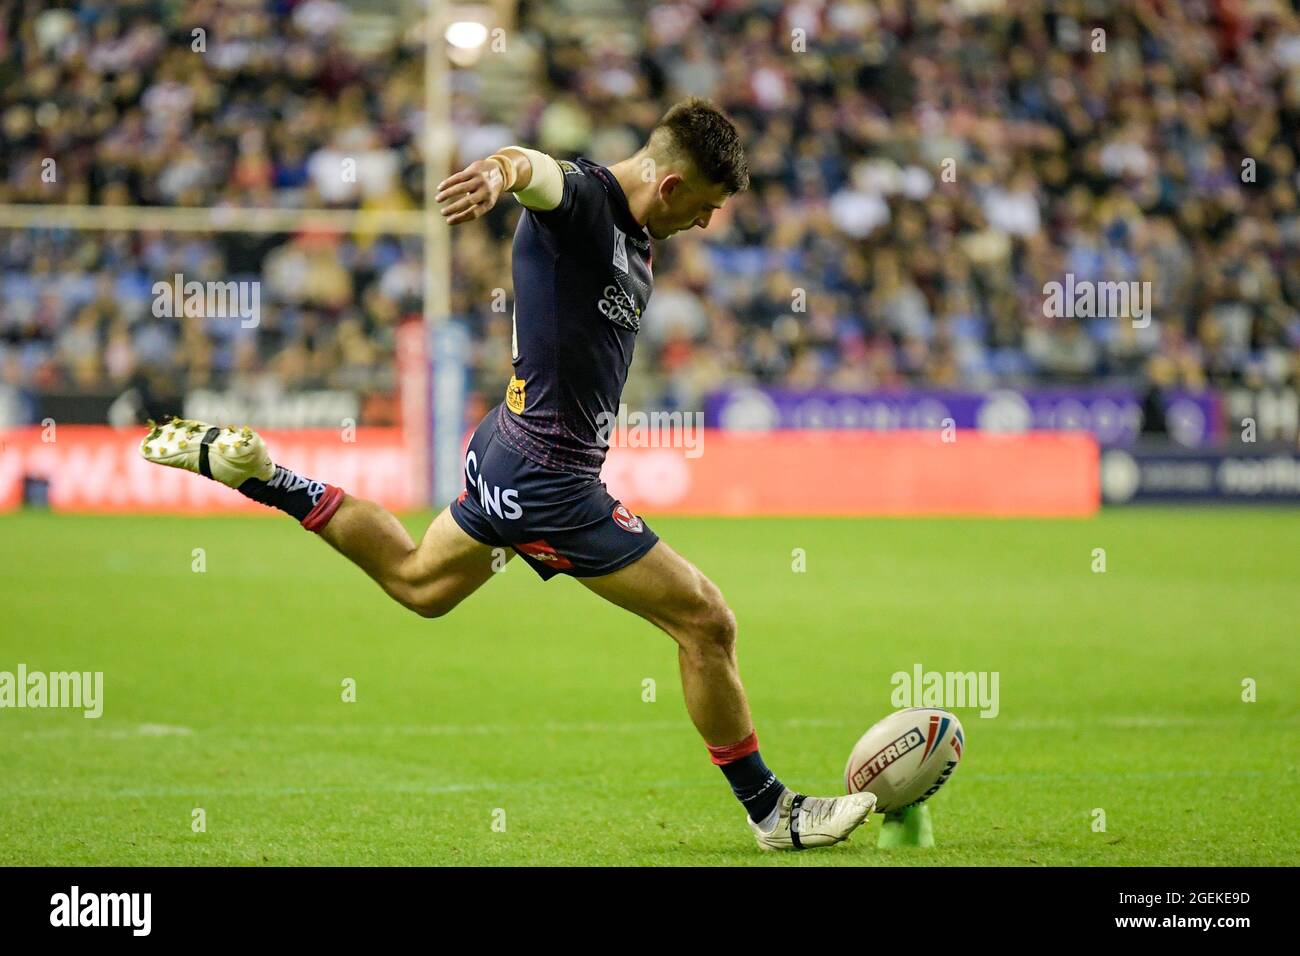 Wigan, UK. 20th Aug, 2021. Lewis Dodd (21) of St Helens kicks a penalty to make it 2-14 in Wigan, United Kingdom on 8/20/2021. (Photo by Simon Whitehead/ SW Photo/News Images/Sipa USA) Credit: Sipa USA/Alamy Live News Stock Photo